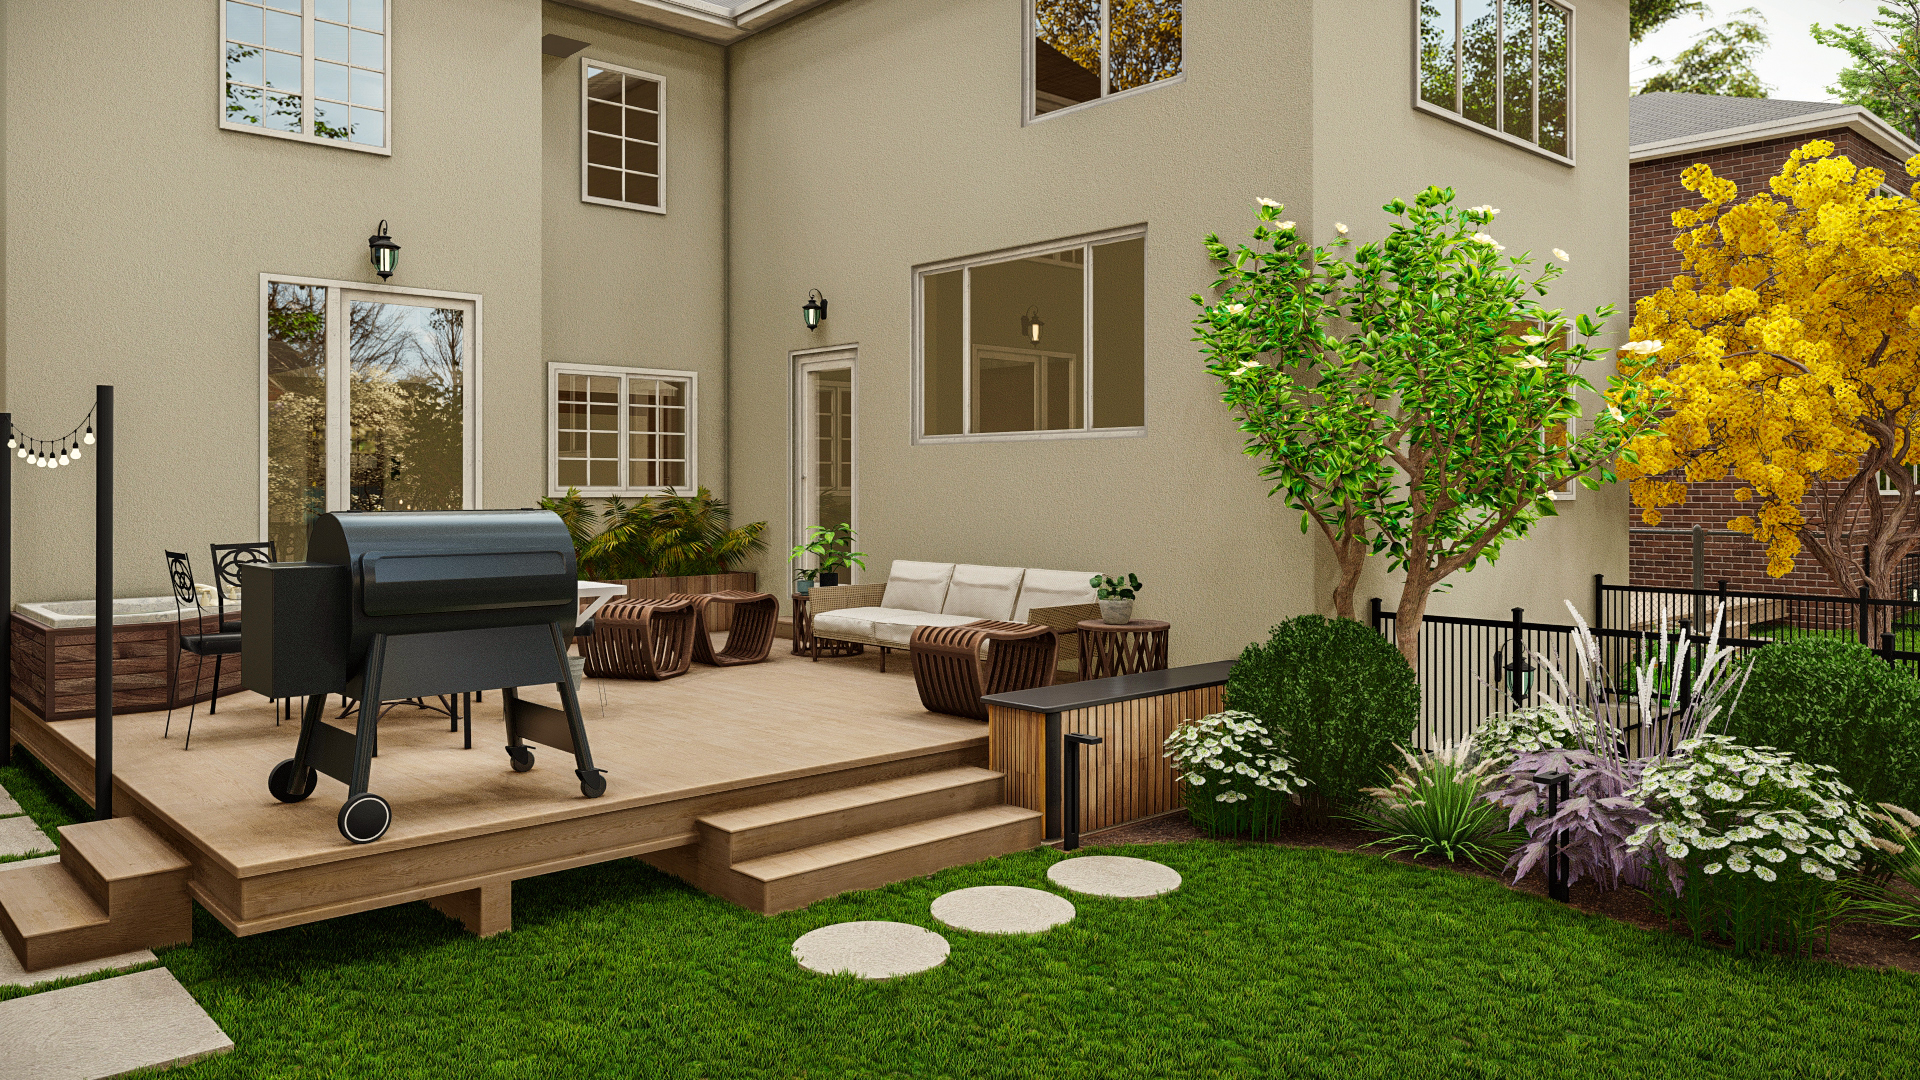 Homelydesign-mississauga-cozy-backyard-patio-living-space-design